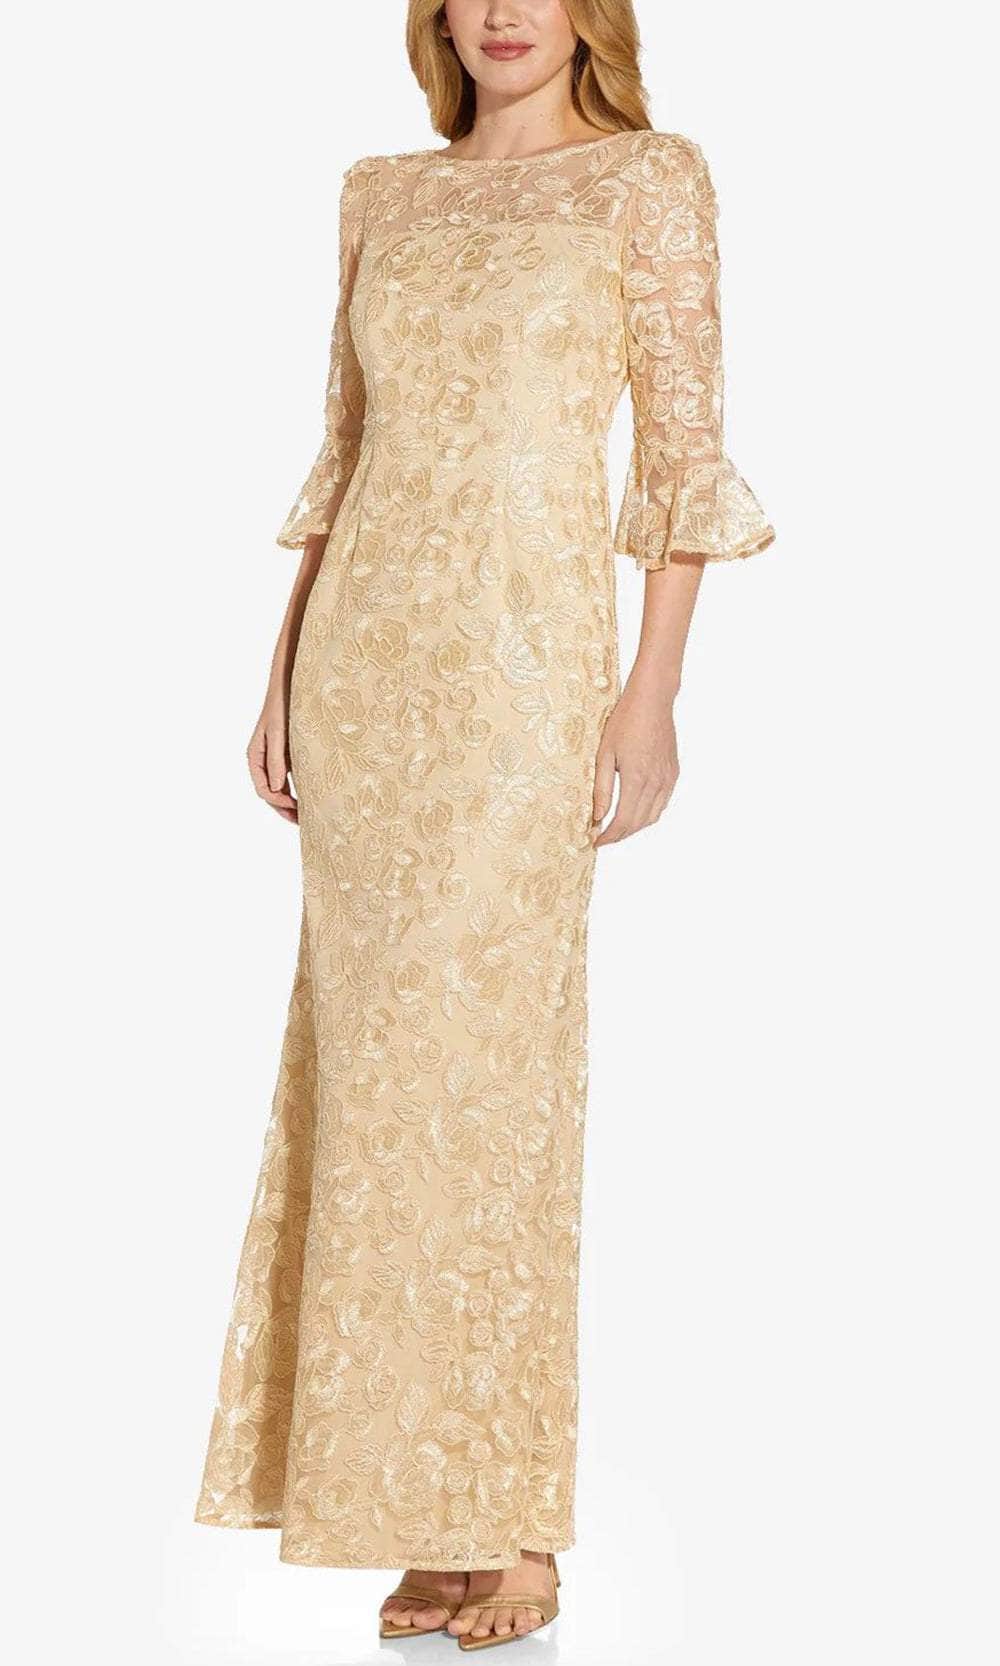 Adrianna Papell AP1E209481 - Bell Sleeve Lace Evening Gown